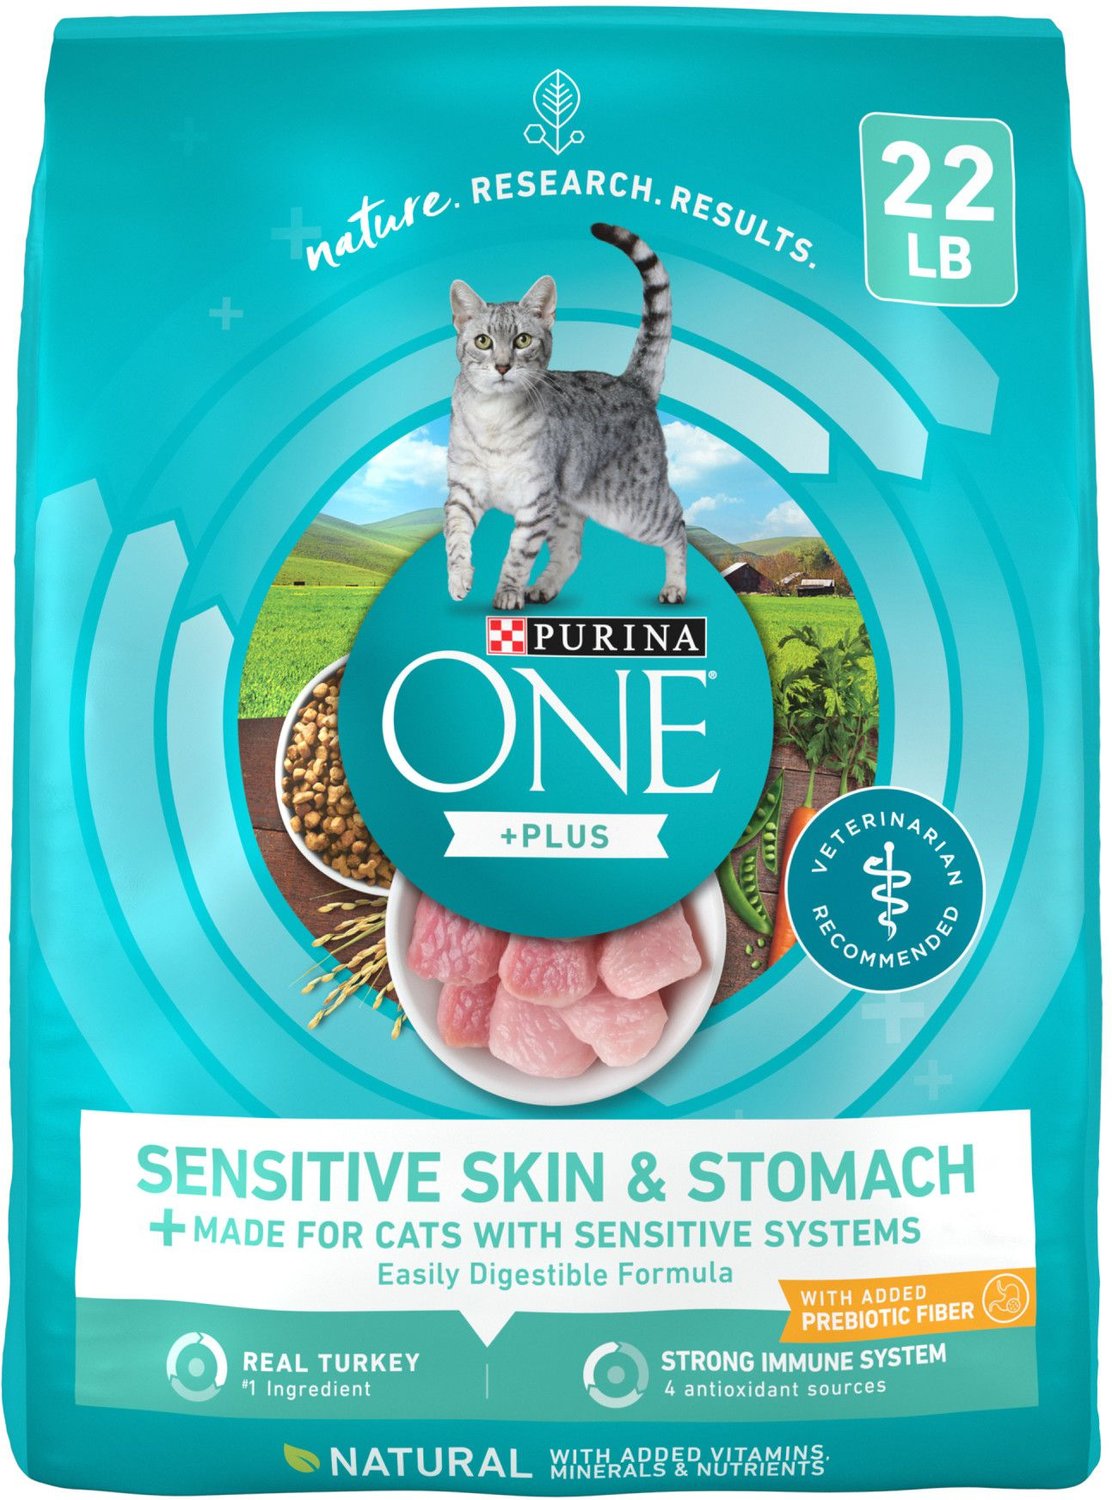 PURINA ONE Sensitive Skin & Stomach Dry Cat Food, 22-lb bag - Chewy.com